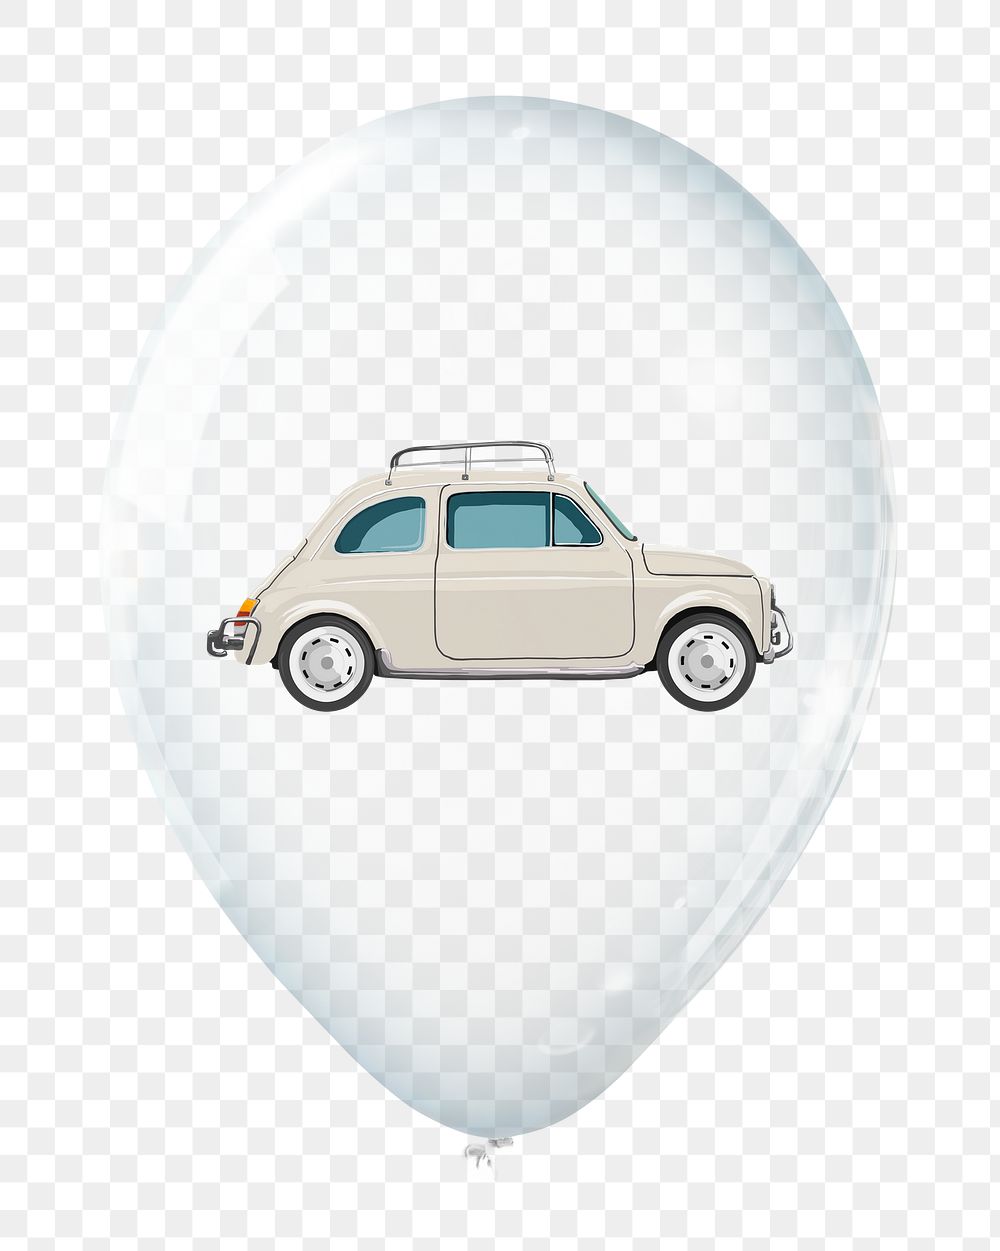 Insurance png, classic car in clear balloon, transparent background